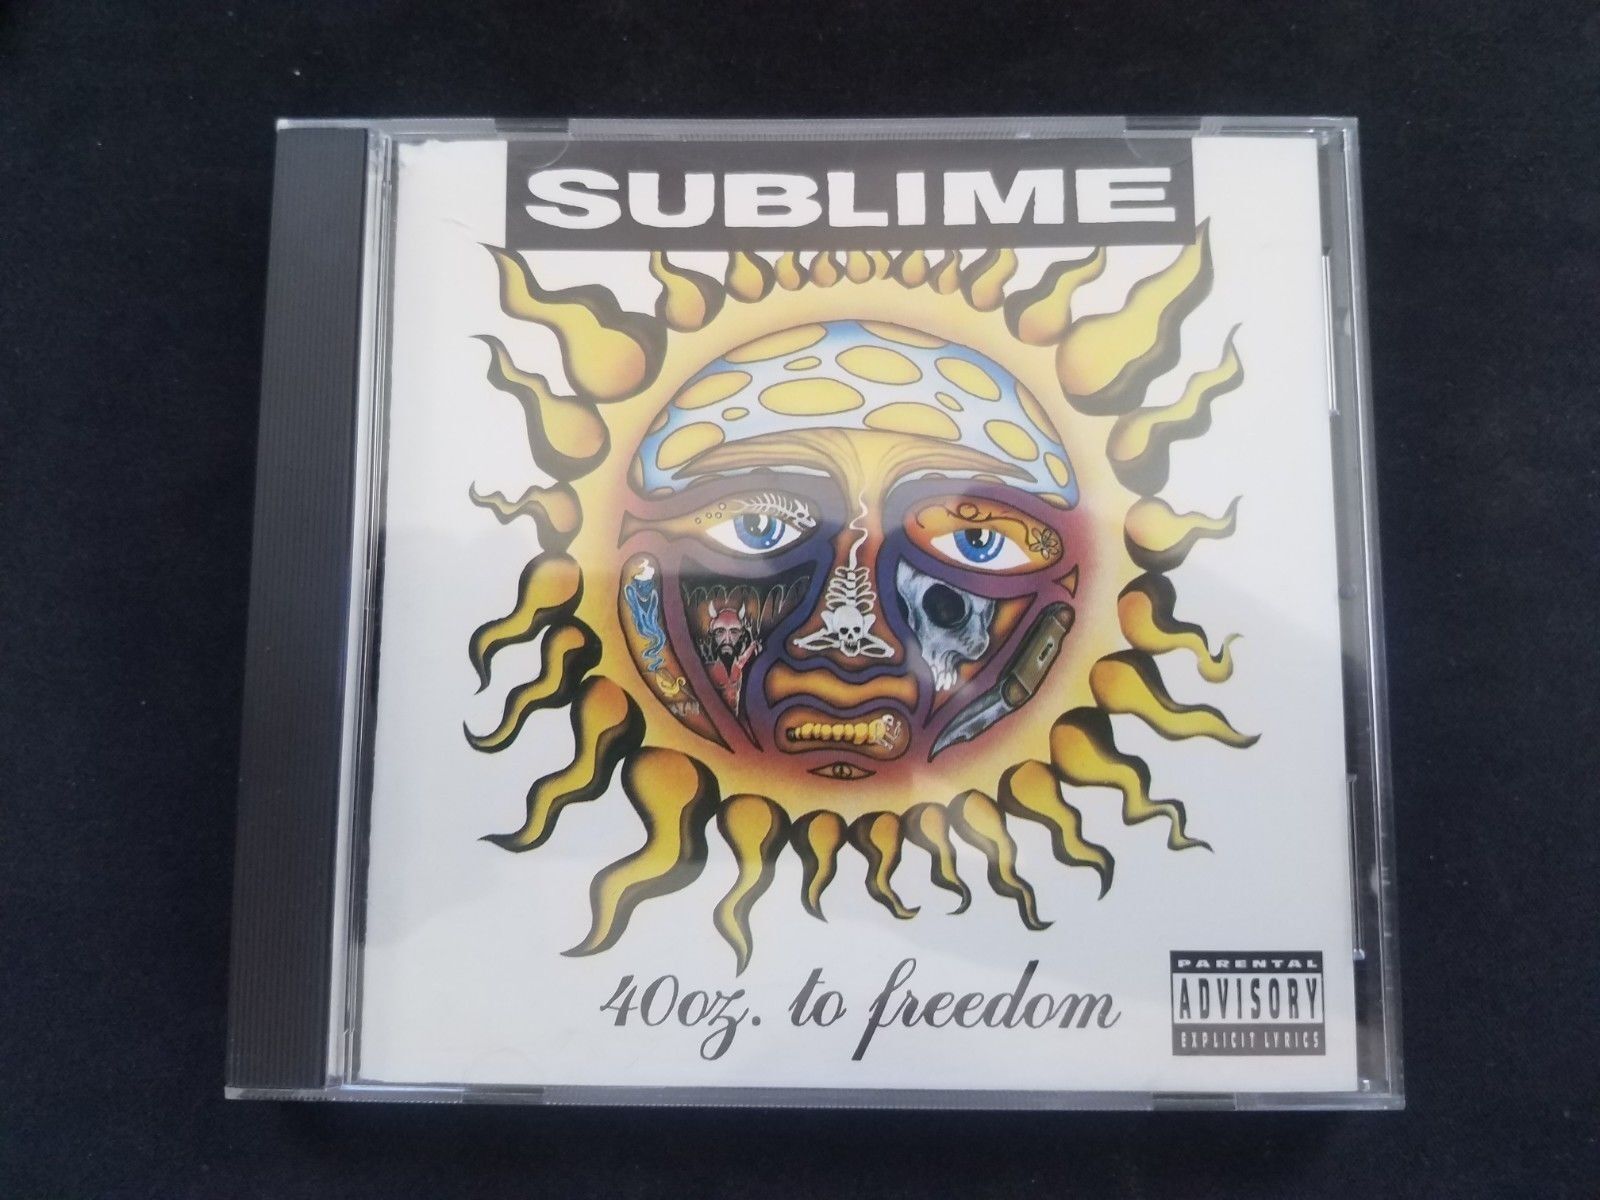 Sublime 40 oz. to Freedom CD 1992 MCA Records/ Gasoline Alley GASD-11474 OOP!